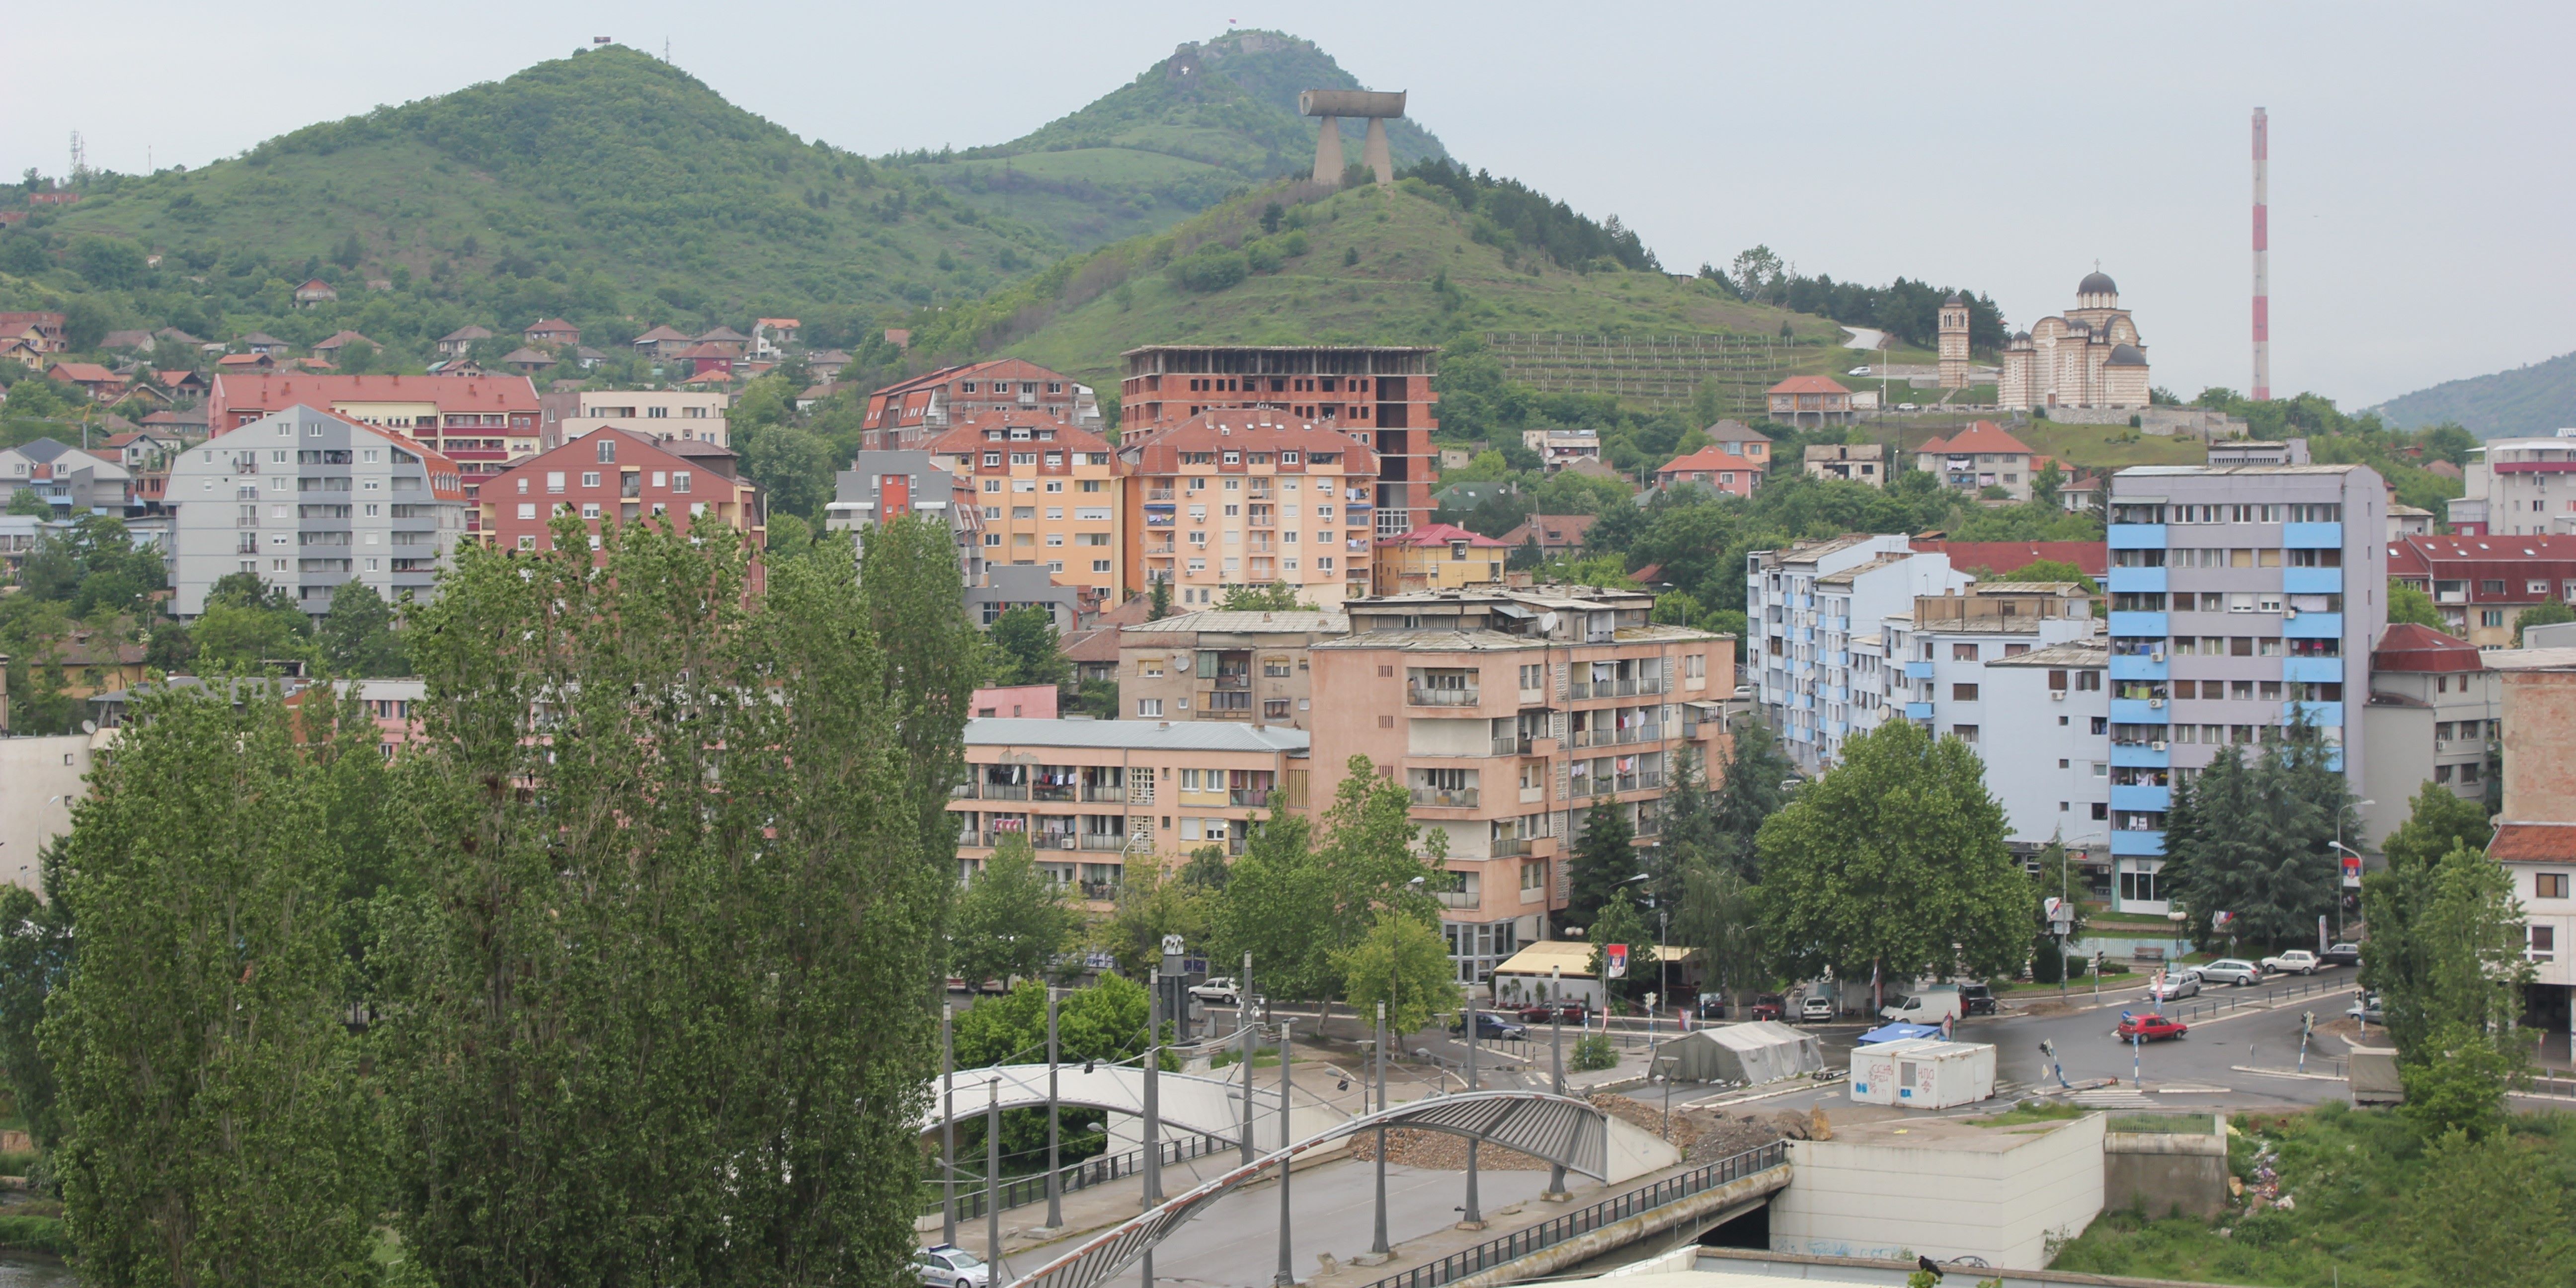 Kosovo referendum to remove Albanian mayors in Serb-dominated northern areas fails due to low turnout